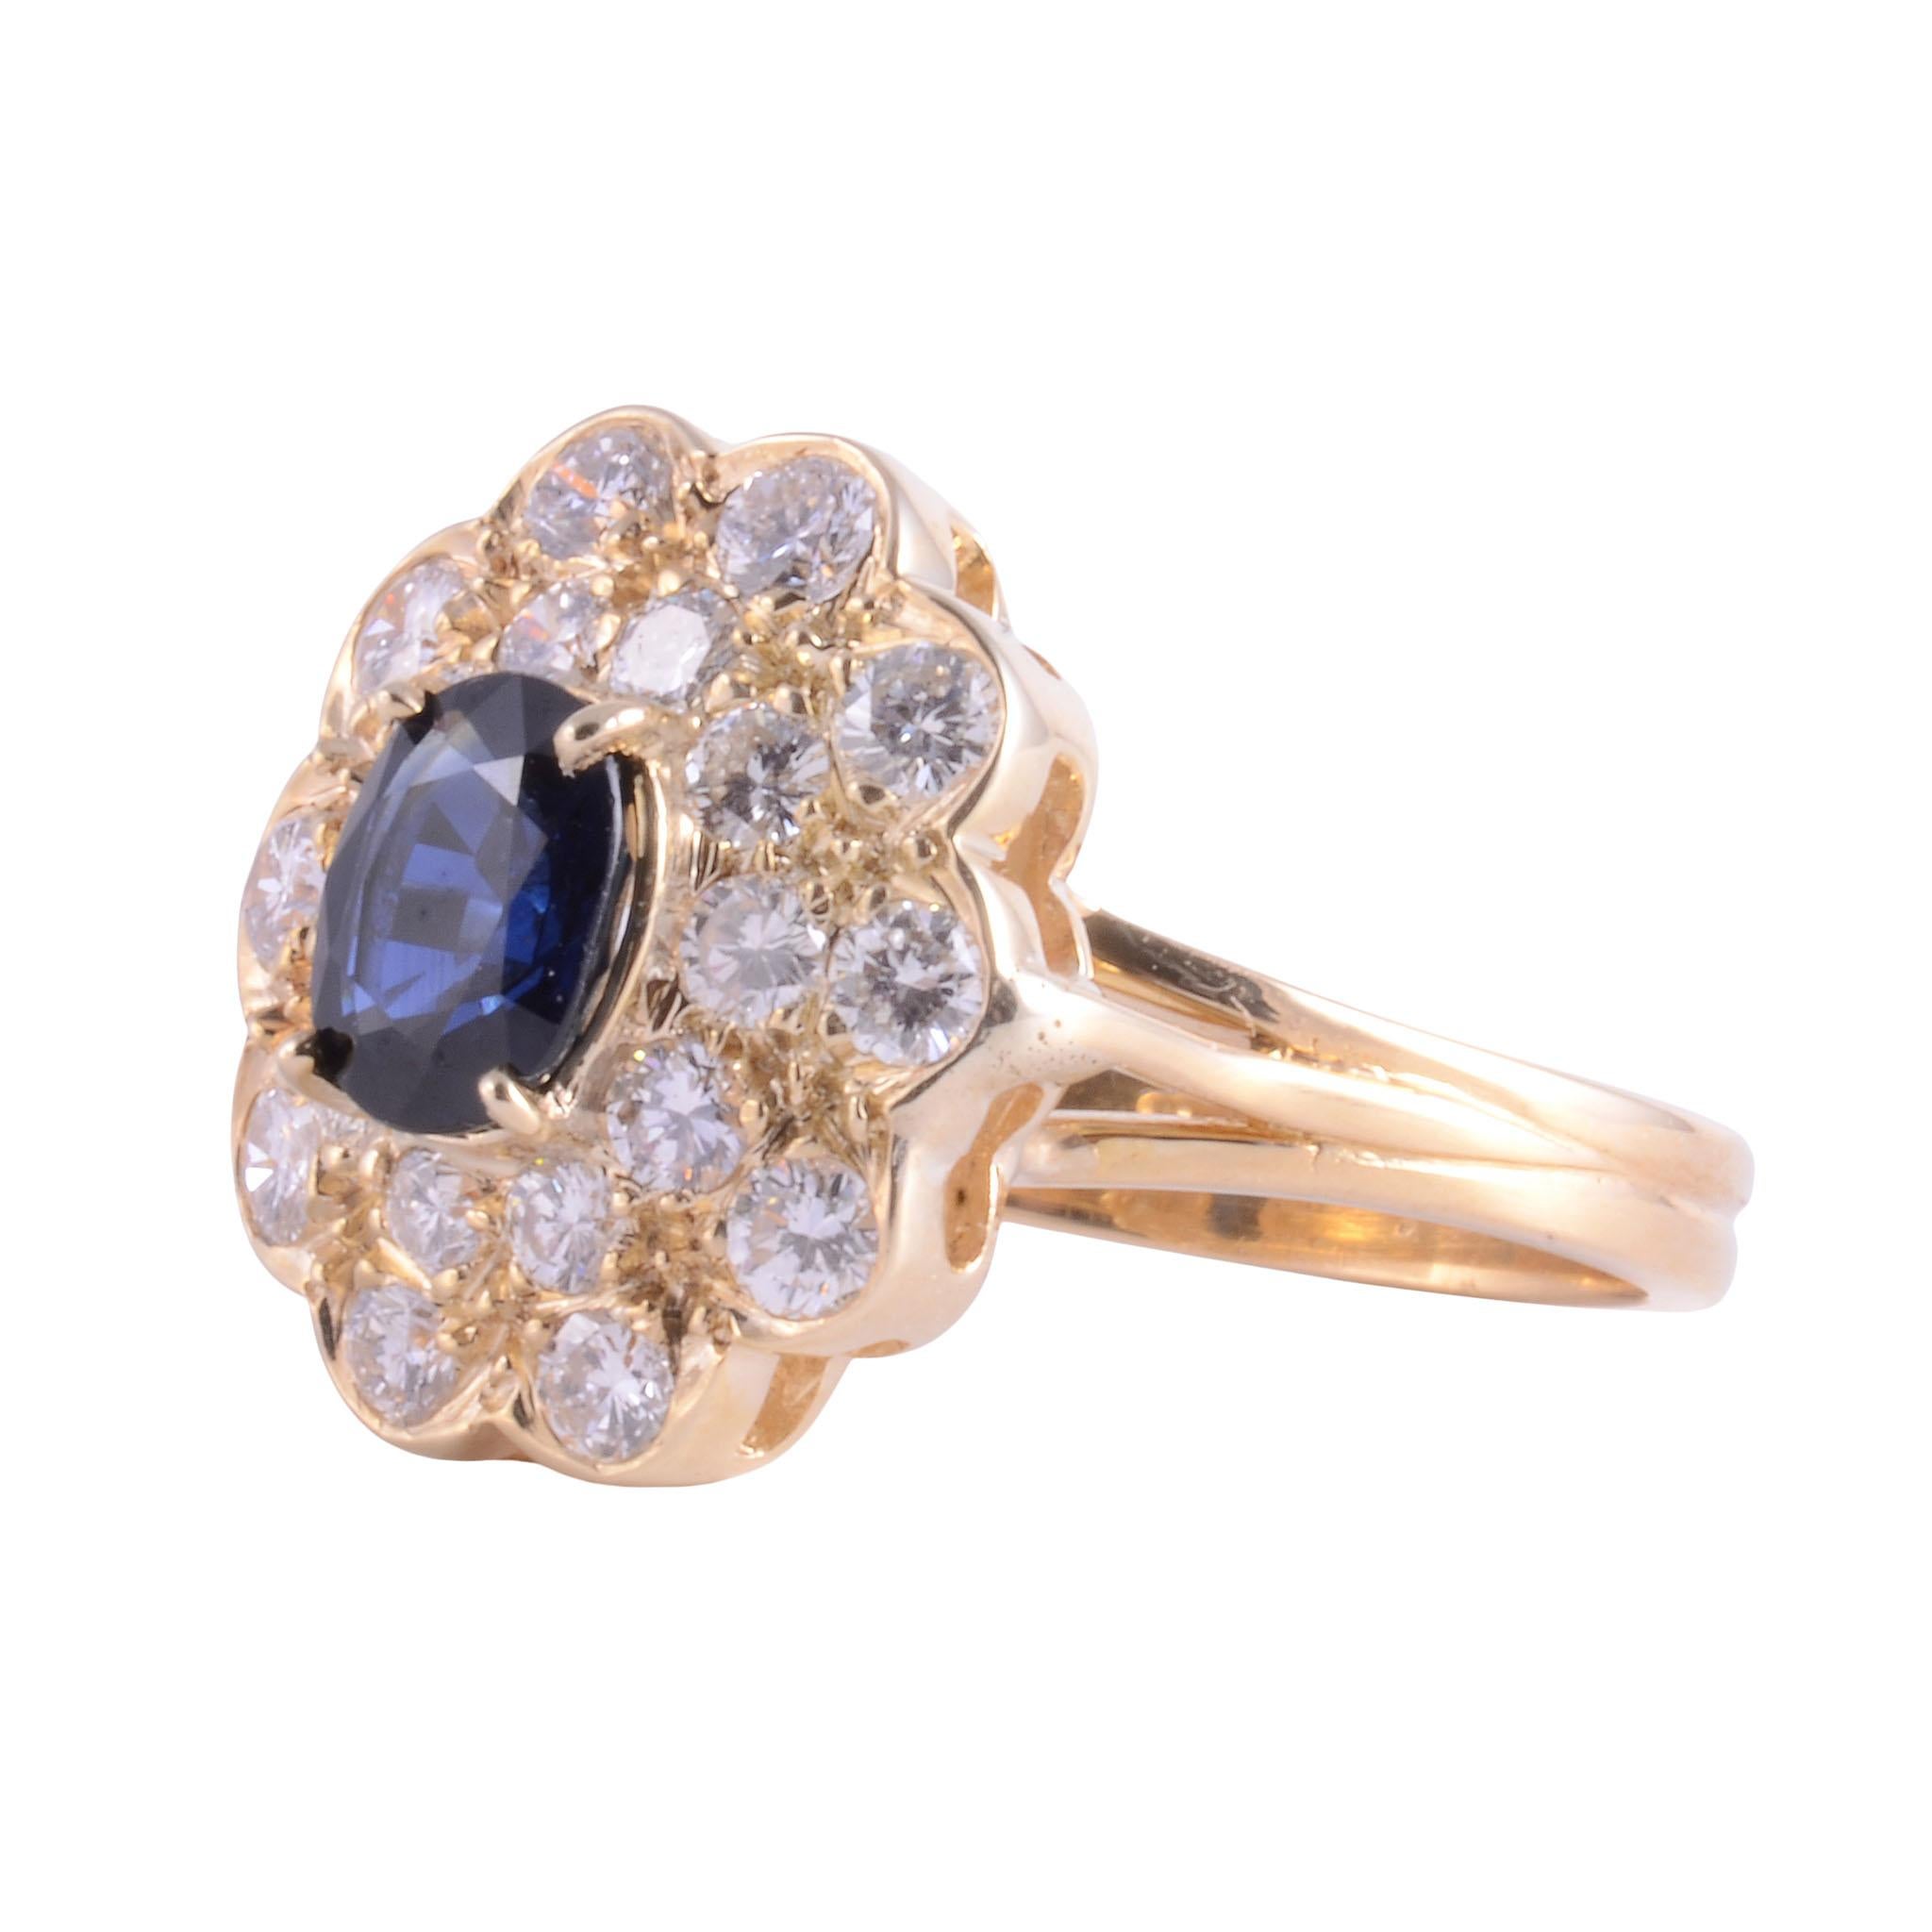 Estate 18K oval sapphire VS Diamond Ring. This 18 karat yellow gold ring features a 0.90 carat oval sapphire and 0.85 carat total weight diamonds with 20 round diamonds VS clarity, G-H color. The sapphire measures 7mm x 5mm and is a fine medium